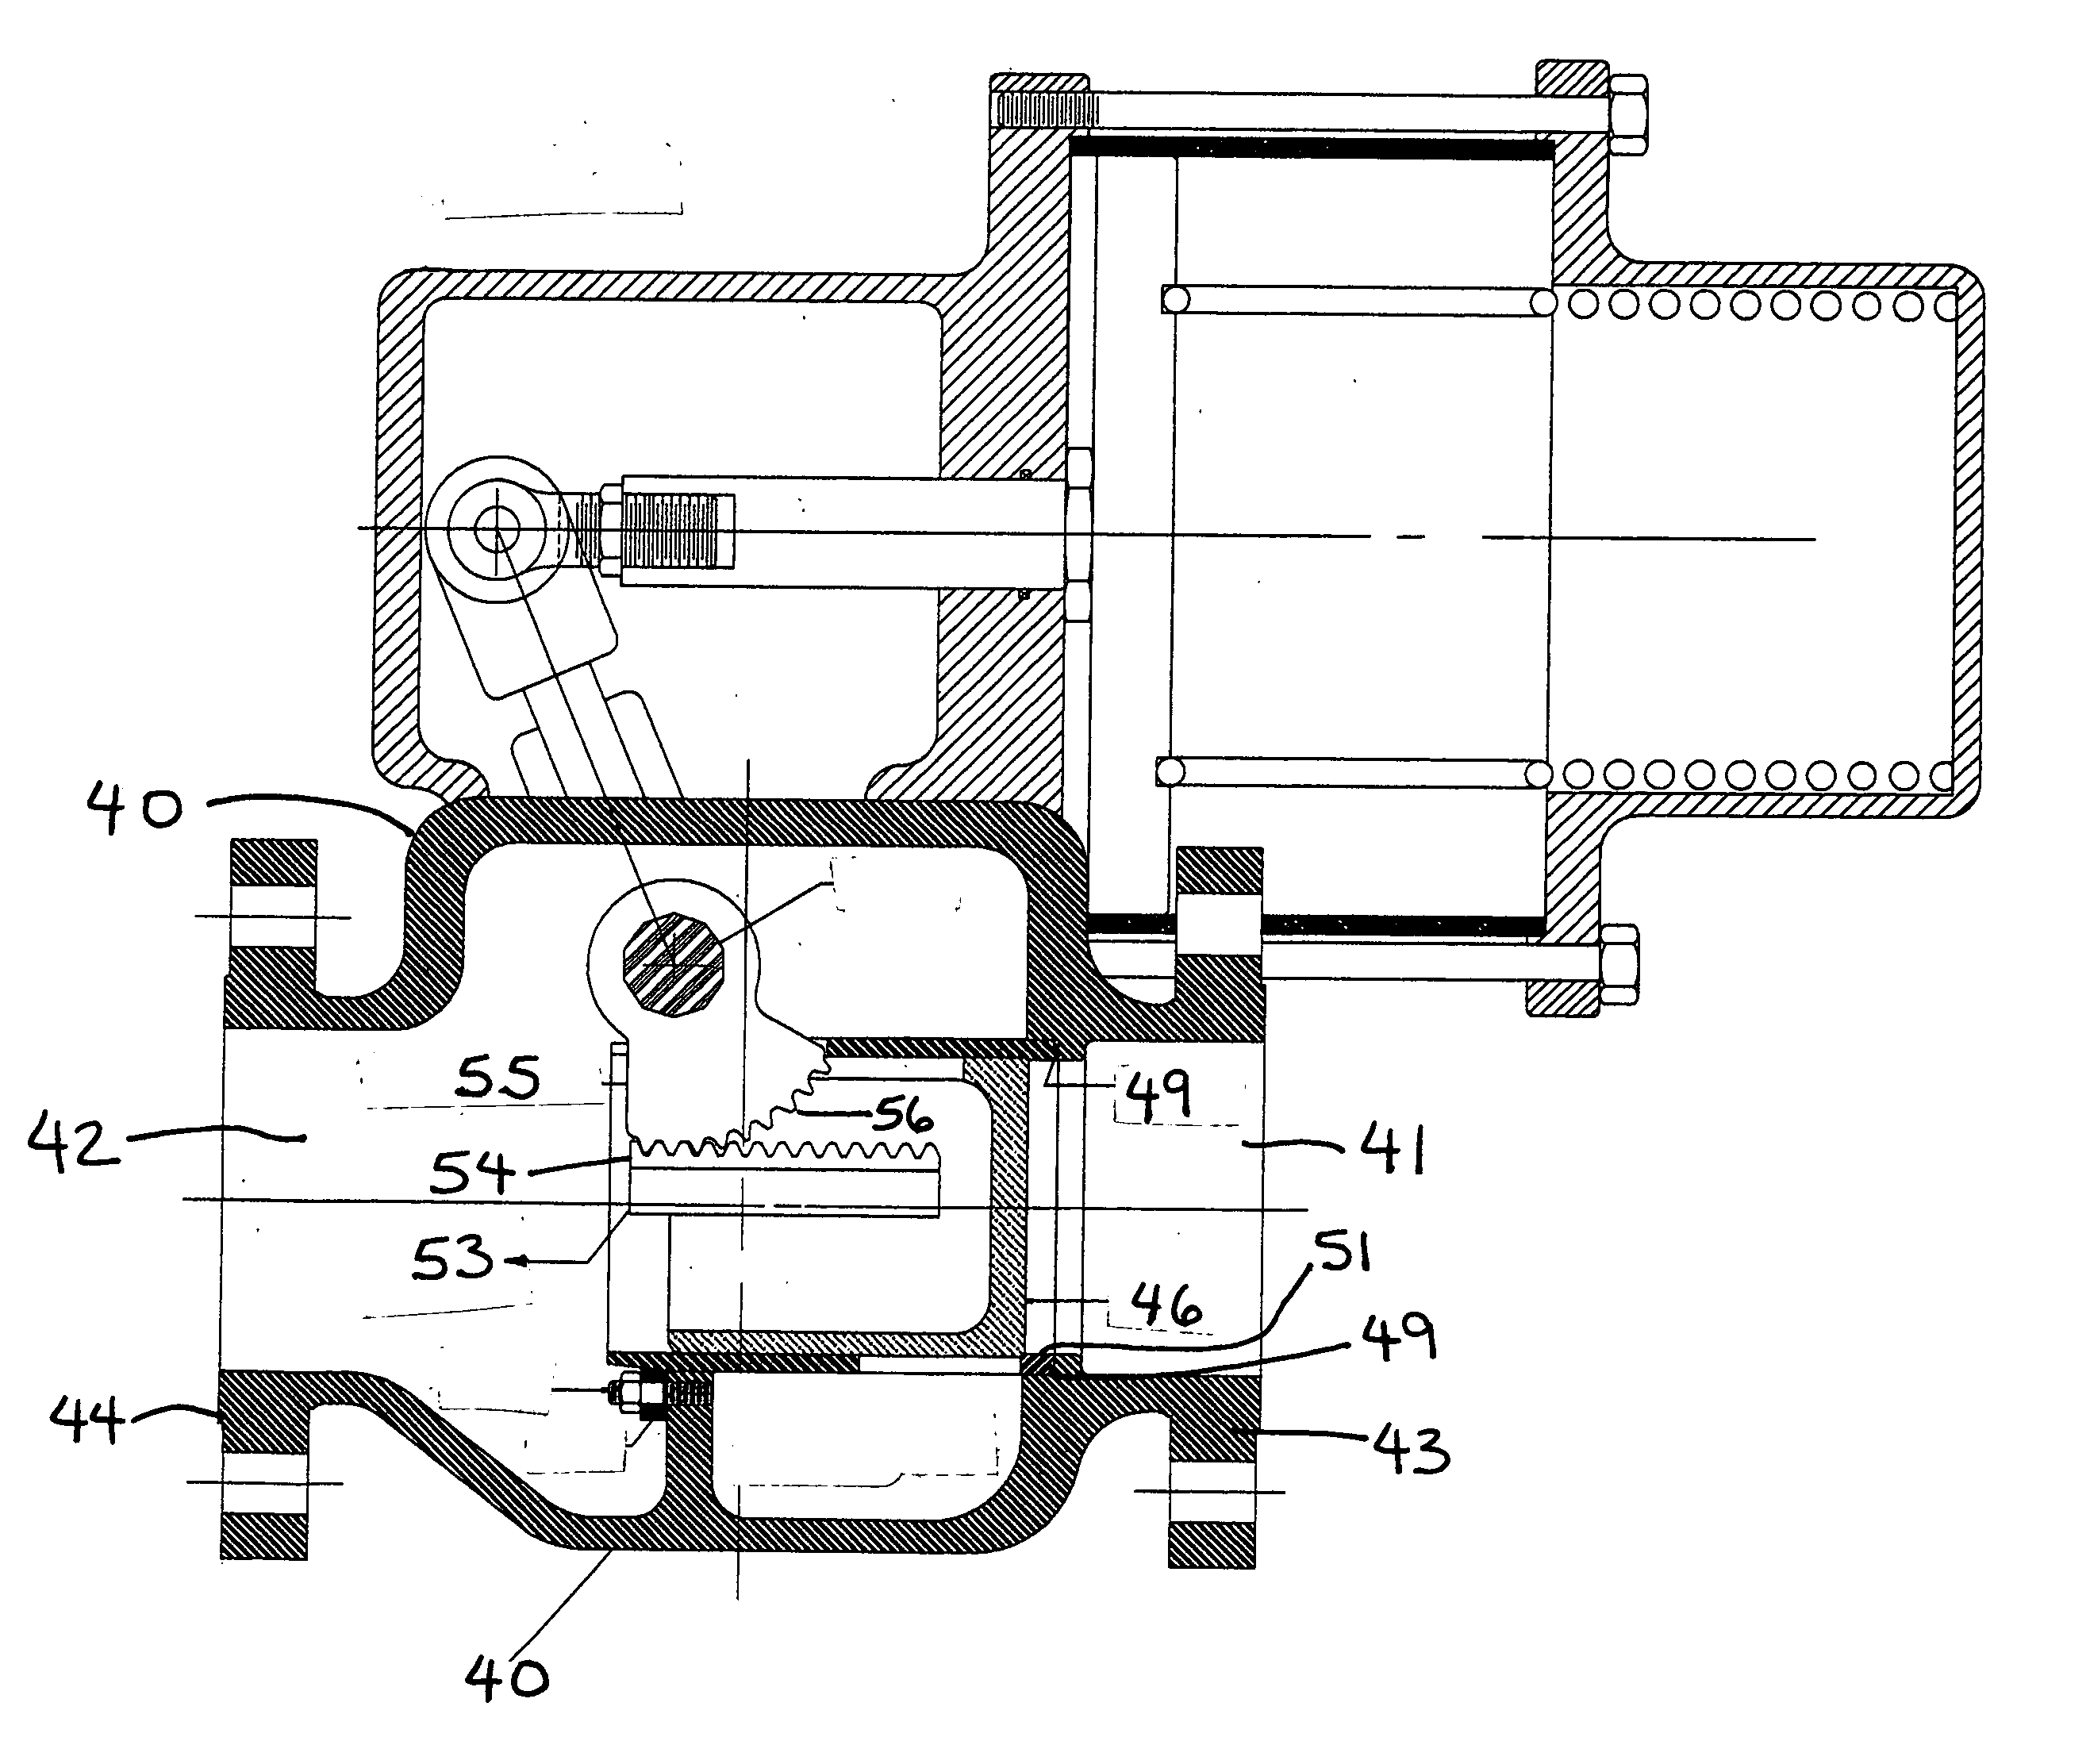 Inline control valve with rack and pinion movement